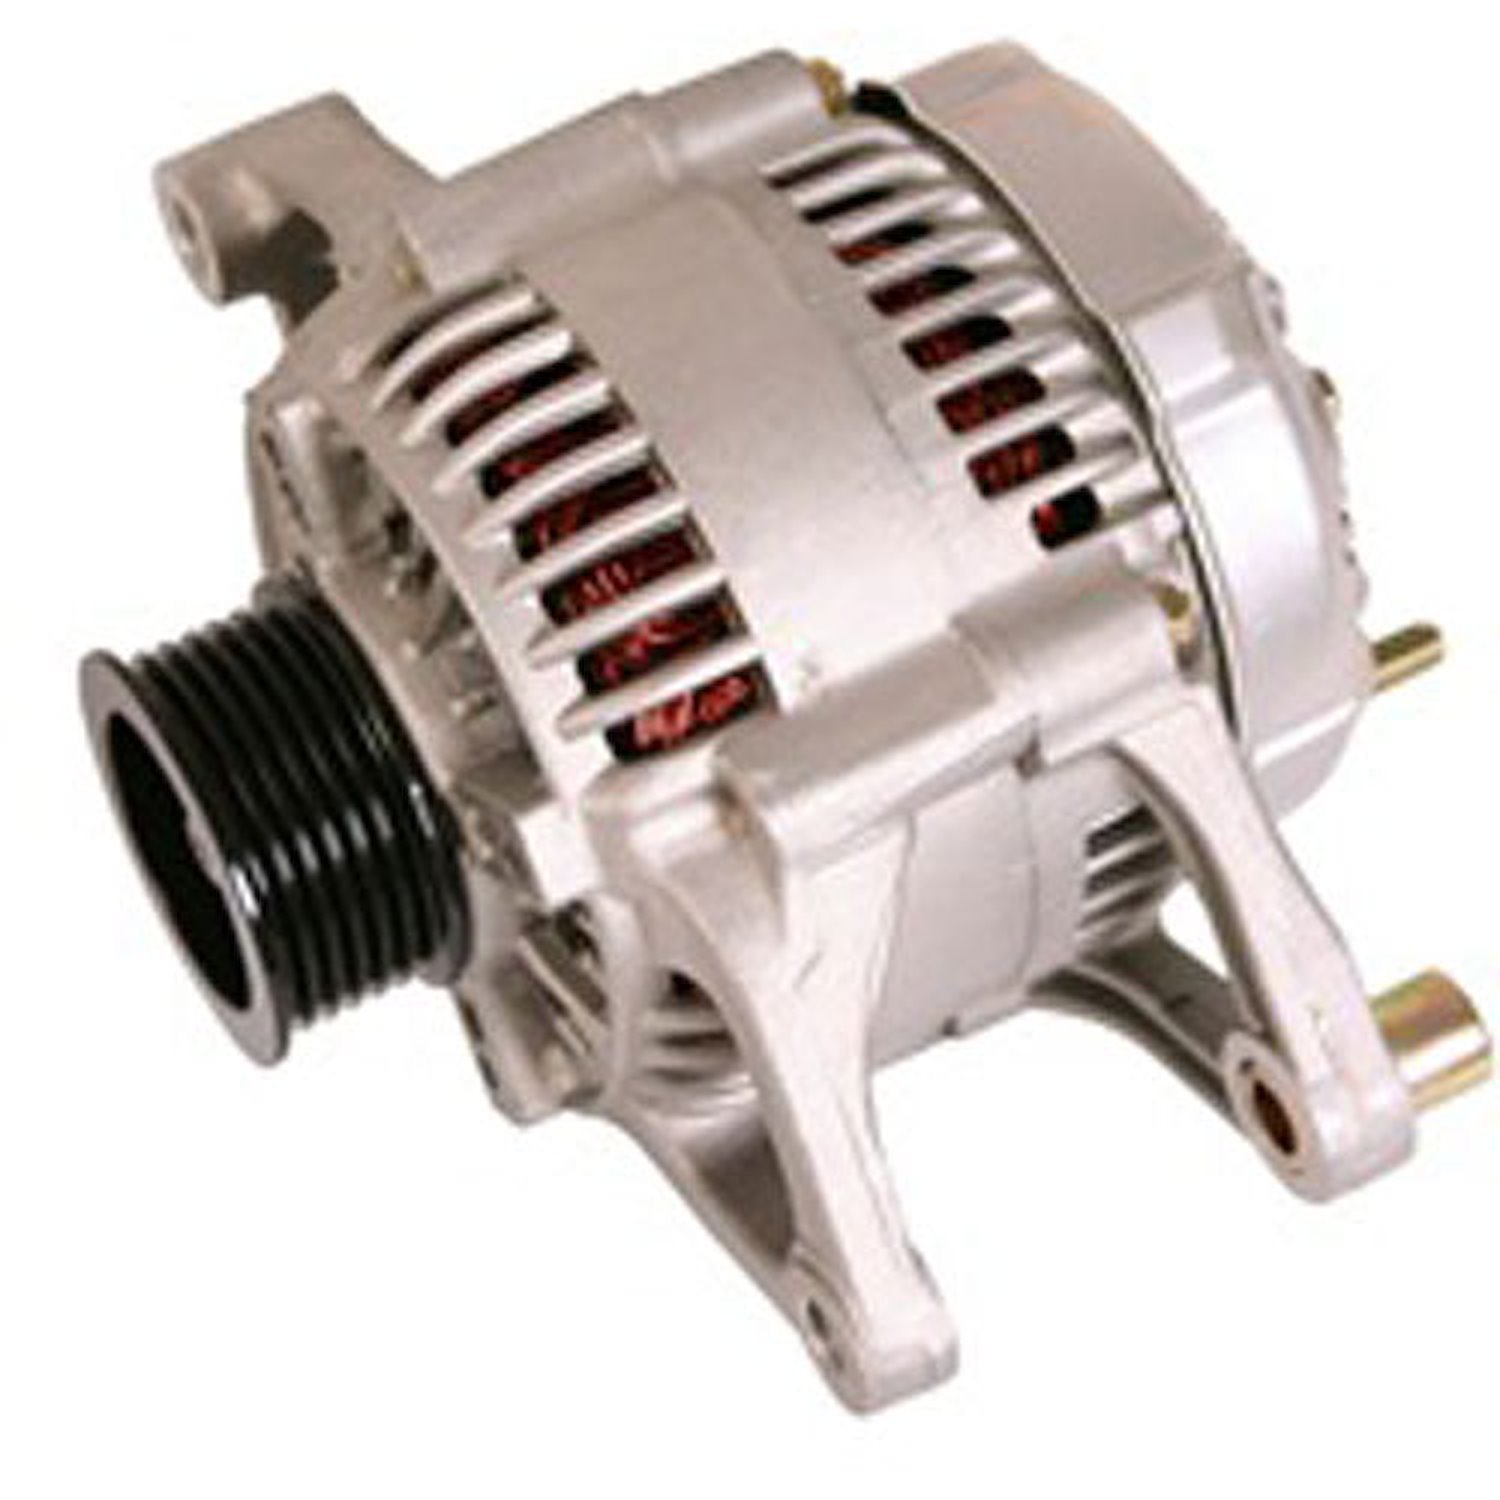 This 117 amp alternator from Omix-ADA fits 01-02 Jeep Wranglers with a 2.5L engine.